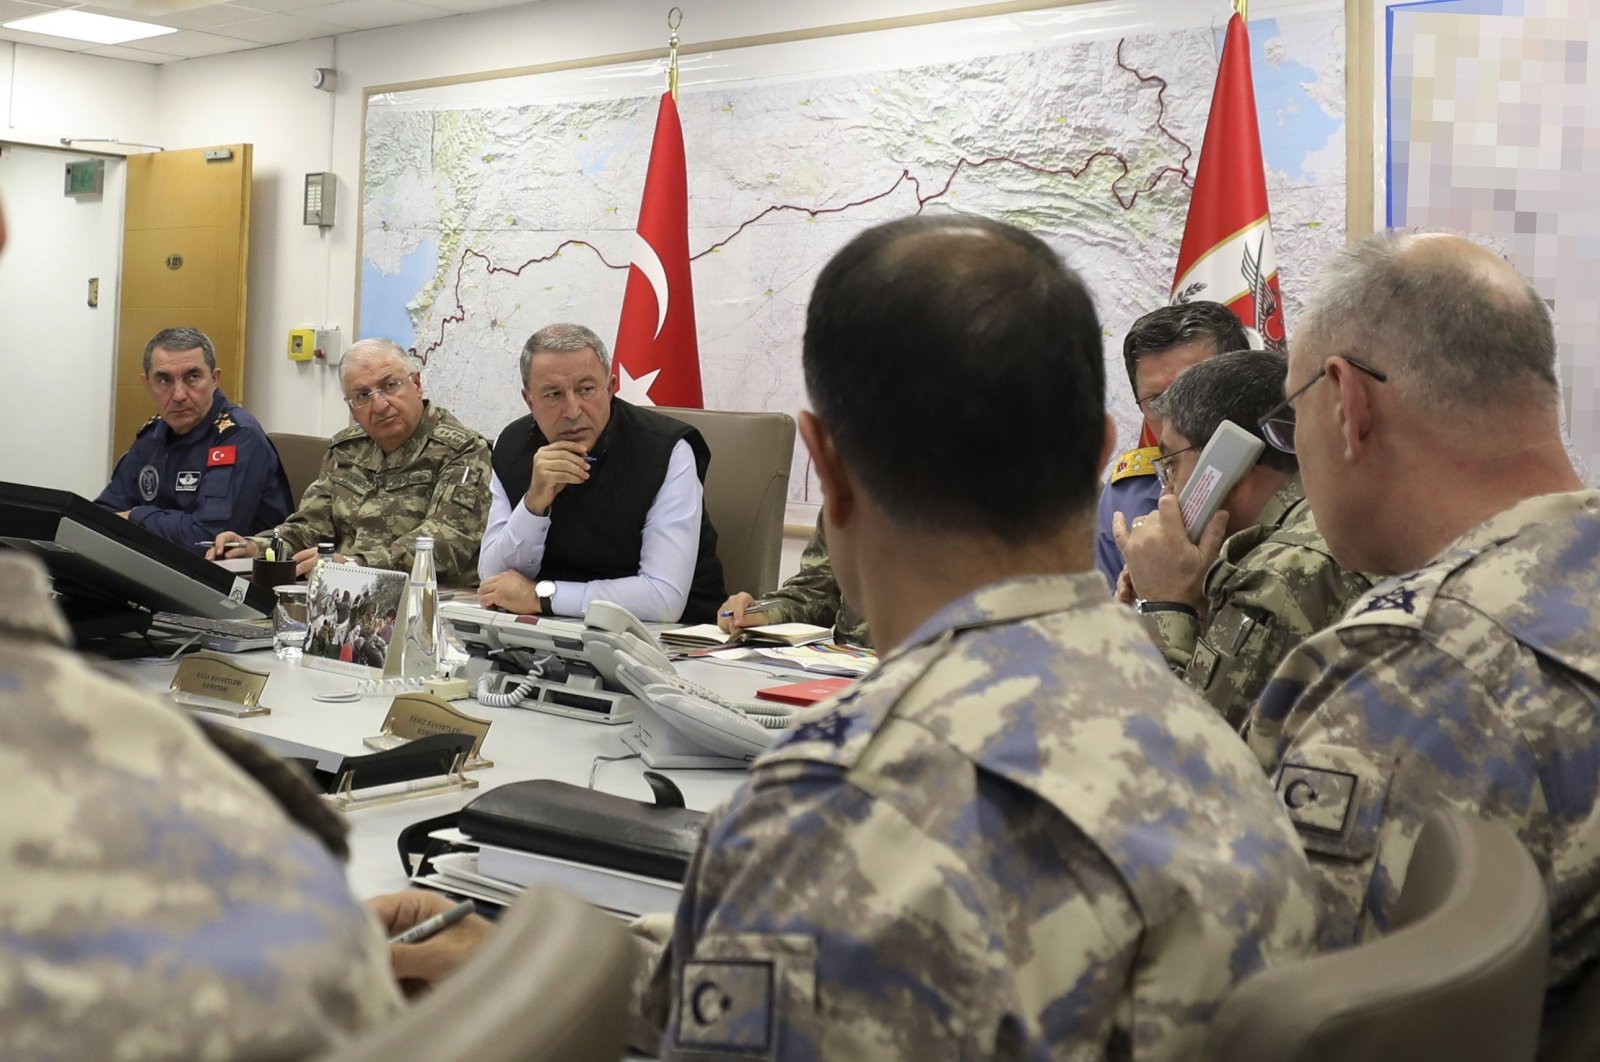 Defense Minister Hulusi Akar (C) with the Turkish army&#039;s top commanders in an operation room at the army headquarters, Ankara, Turkey, Oct. 9, 2019. (Defense Ministry Photo)